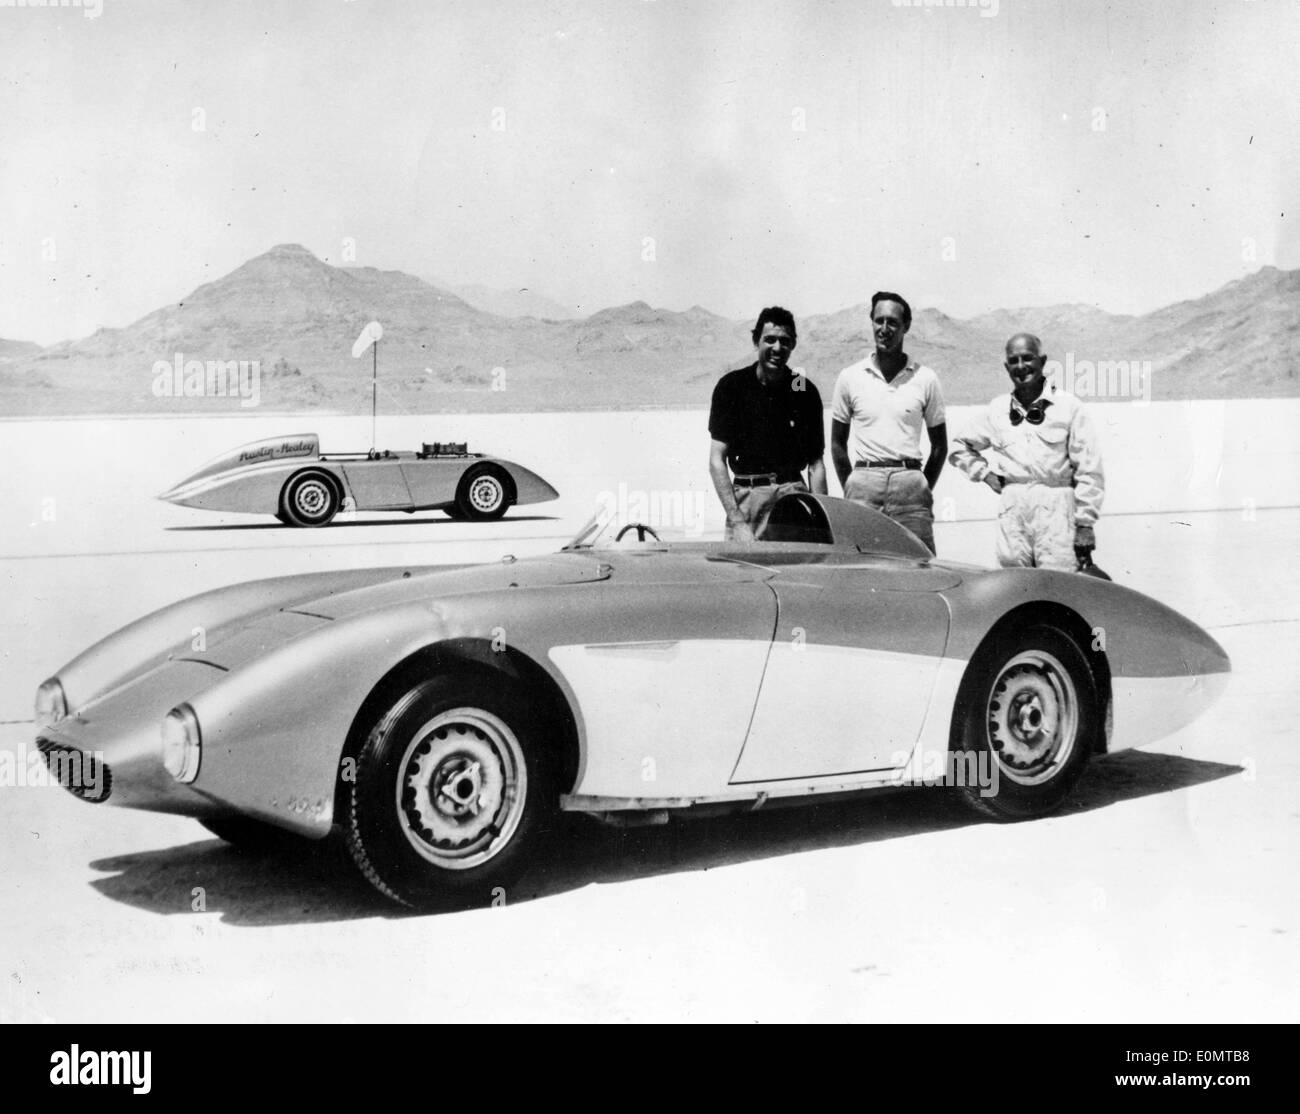 File Photo - CARROLL SHELBY (Jan 11, 1923-May 10, 2012), one of the biggest legends in the car industry and a champion auto racer, who built the infamous Shelby Cobra sports car and helped transform the Ford's Mustang and Chrysler's Viper, has died in a Texas hospital. He was 89. Shelby had homes in Los Angeles and Texas. Shelby was inducted into the Automobile Hall of Fame in 1992. and is best known for his career in the auto industry including a champion race car driver, a racing team owner, an automobile manufacturer and an automotive consultant. PICTURED: Aug Stock Photo